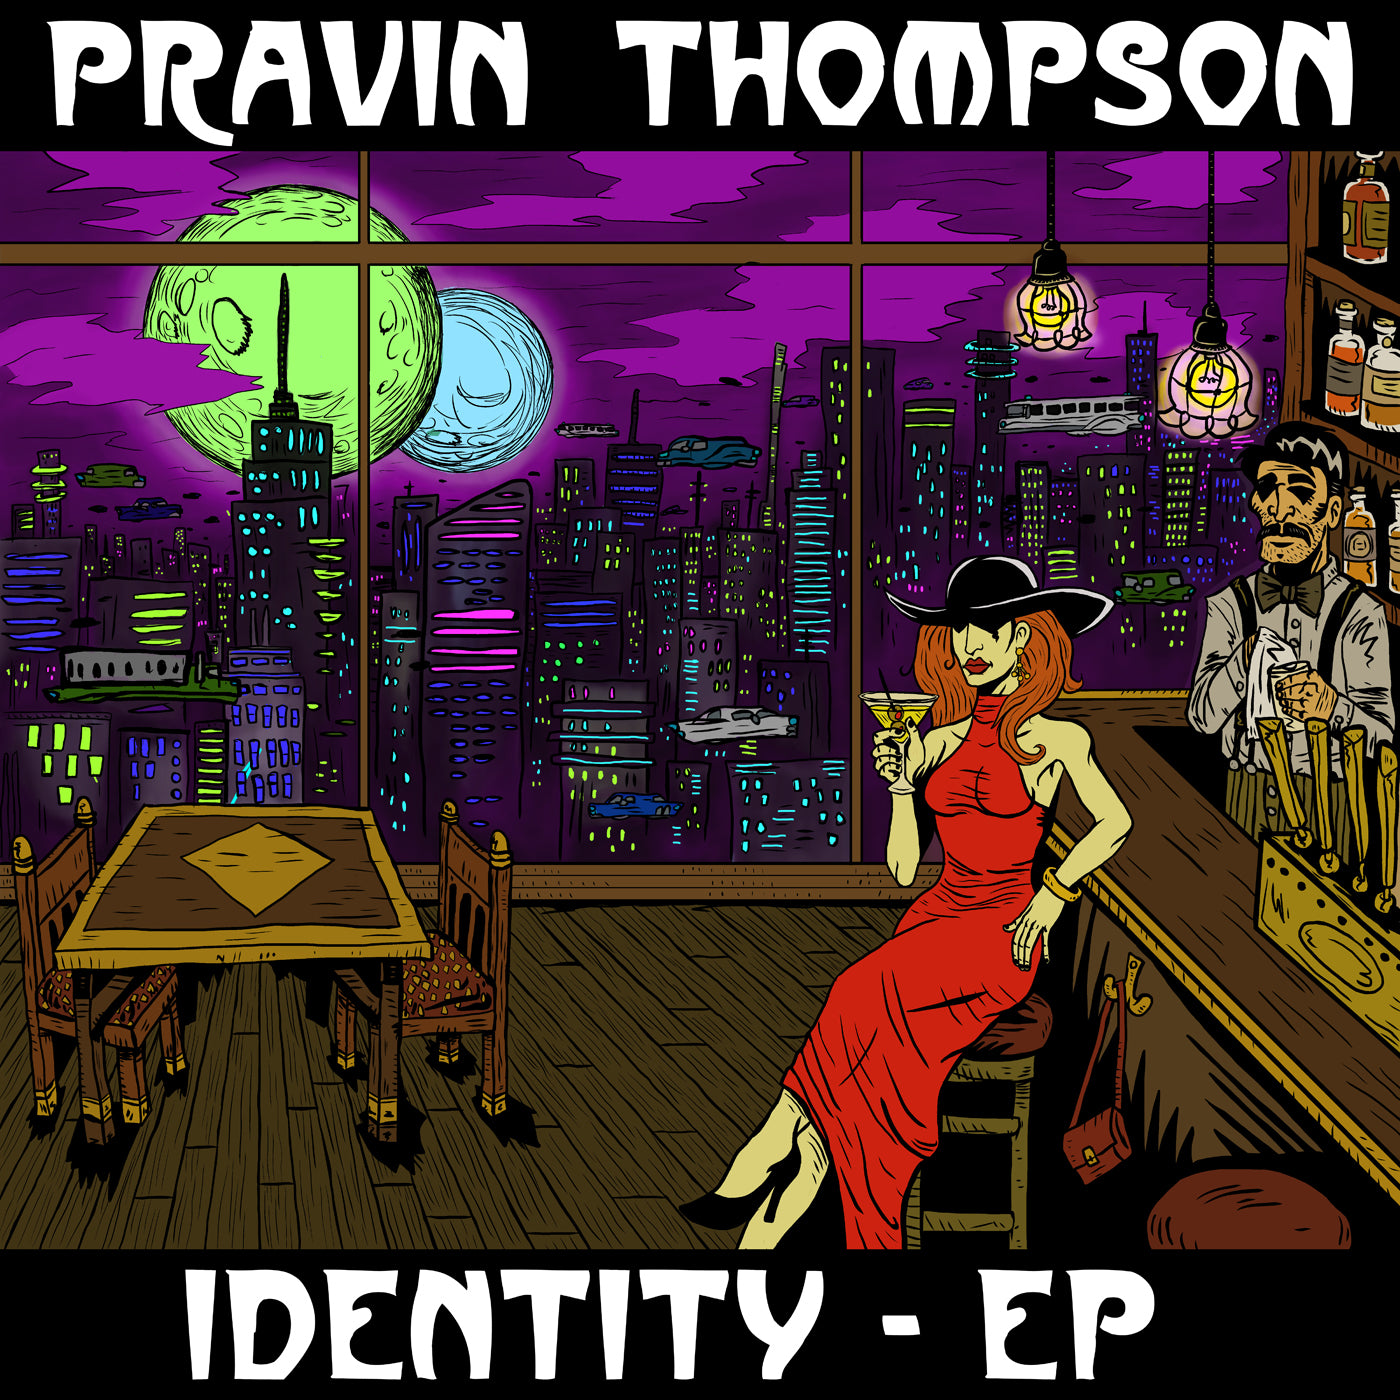 Identity EP first edition